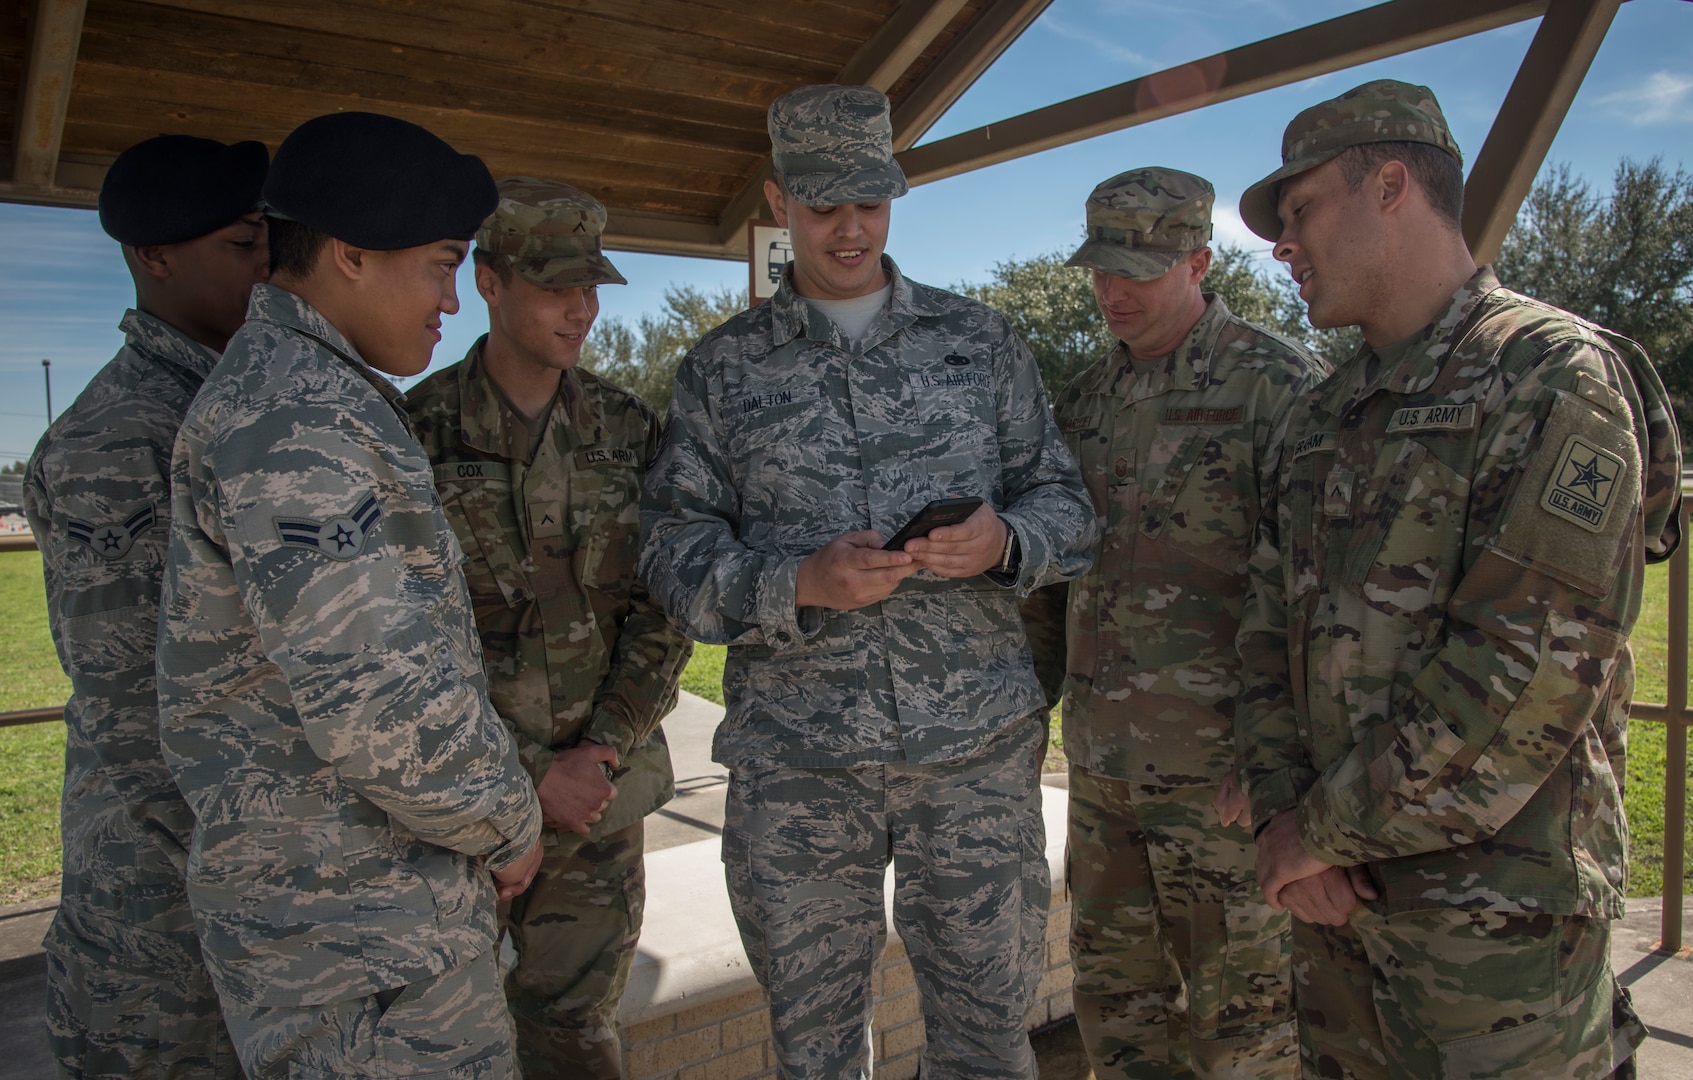 Tech. Sgt. Cody Dalton, 502d Logistics Readiness Squadron NCO in charge of contracting officer representatives, and Master Sgt. Justin Hartley, Joint Base San Antonio ground transportation support supervisor, showcase the “Ride Systems” application for JBSA shuttles to technical school students waiting for the bus at JBSA-Lackland Feb. 20, 2019.  The app includes Global Positioning System tracking capabilities with mapping and coordination with the ground transportation offices to track exactly where each bus is, their route and how long the wait time is.